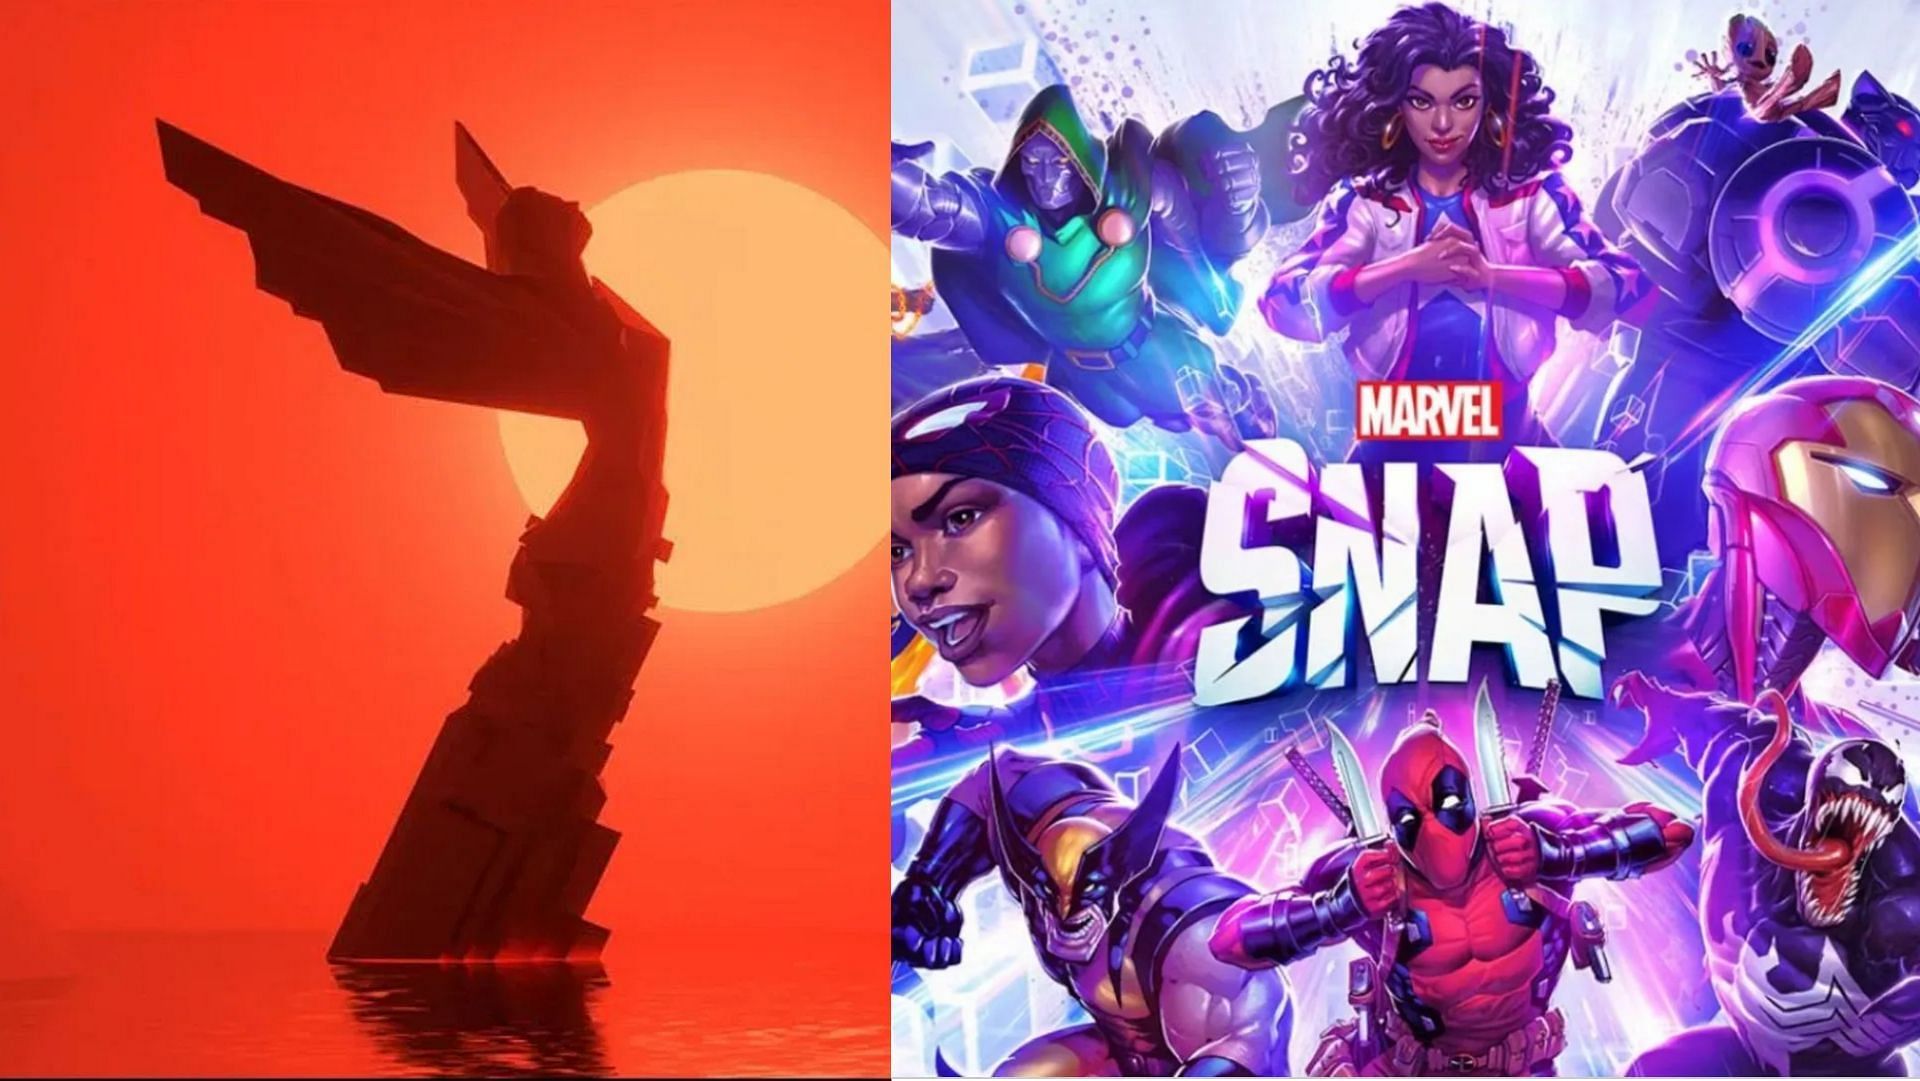 The Game Awards: 2022's Best Mobile Game is a Marvel one - Times of India